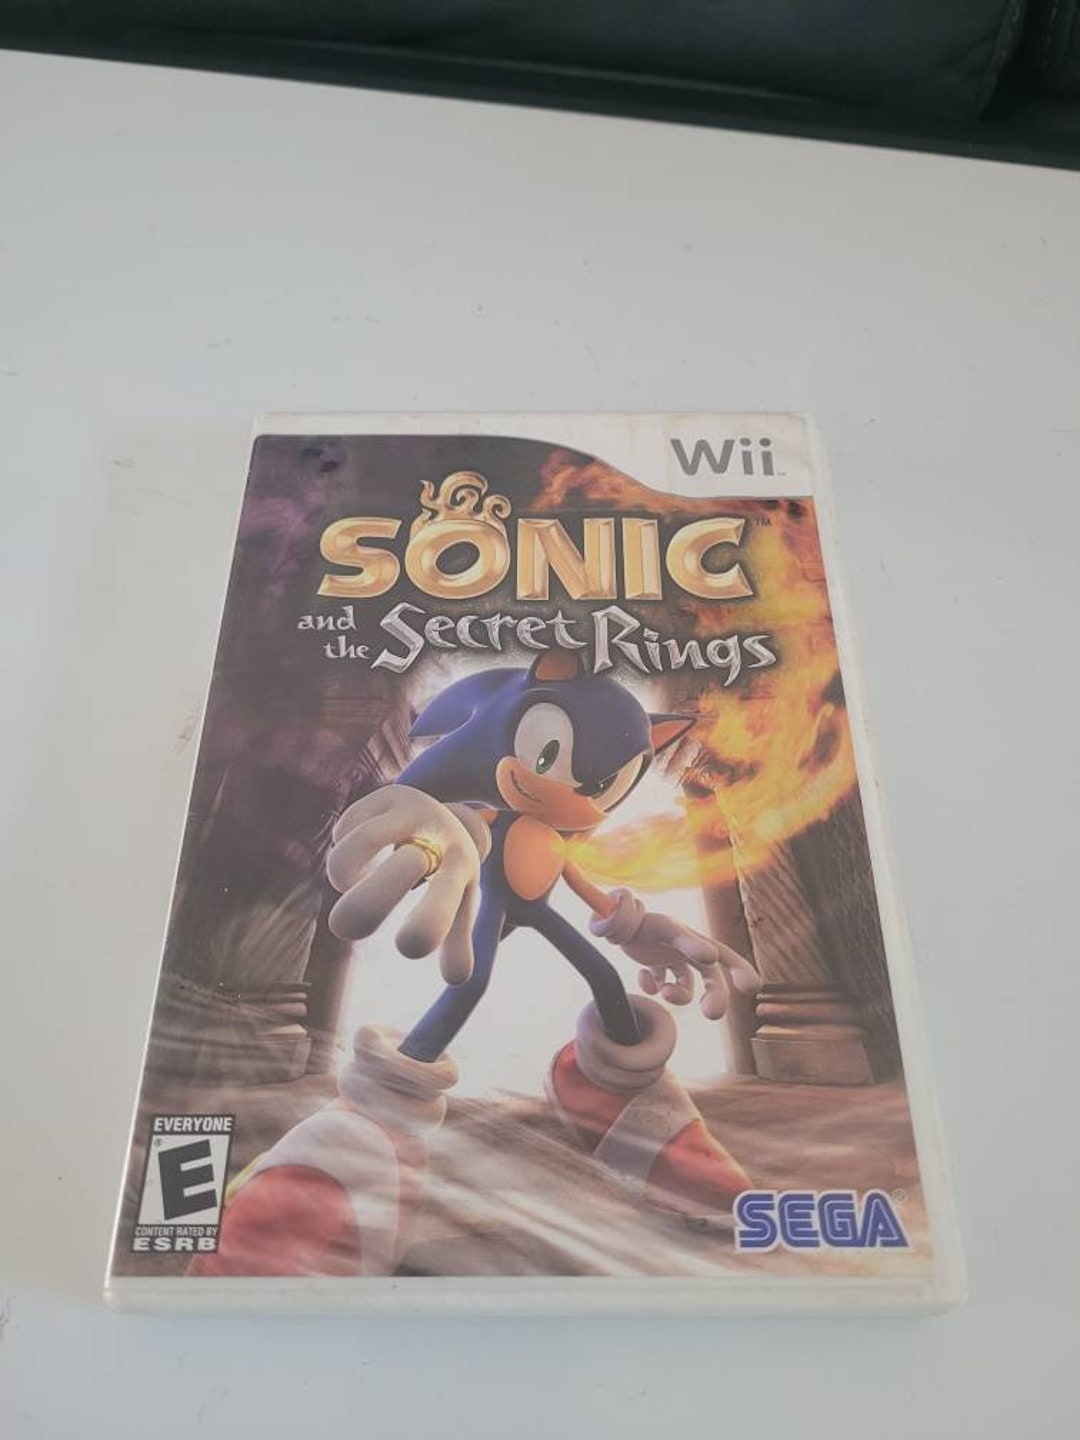 Sonic and the Secret Rings Wii Box Art Cover by jevangod